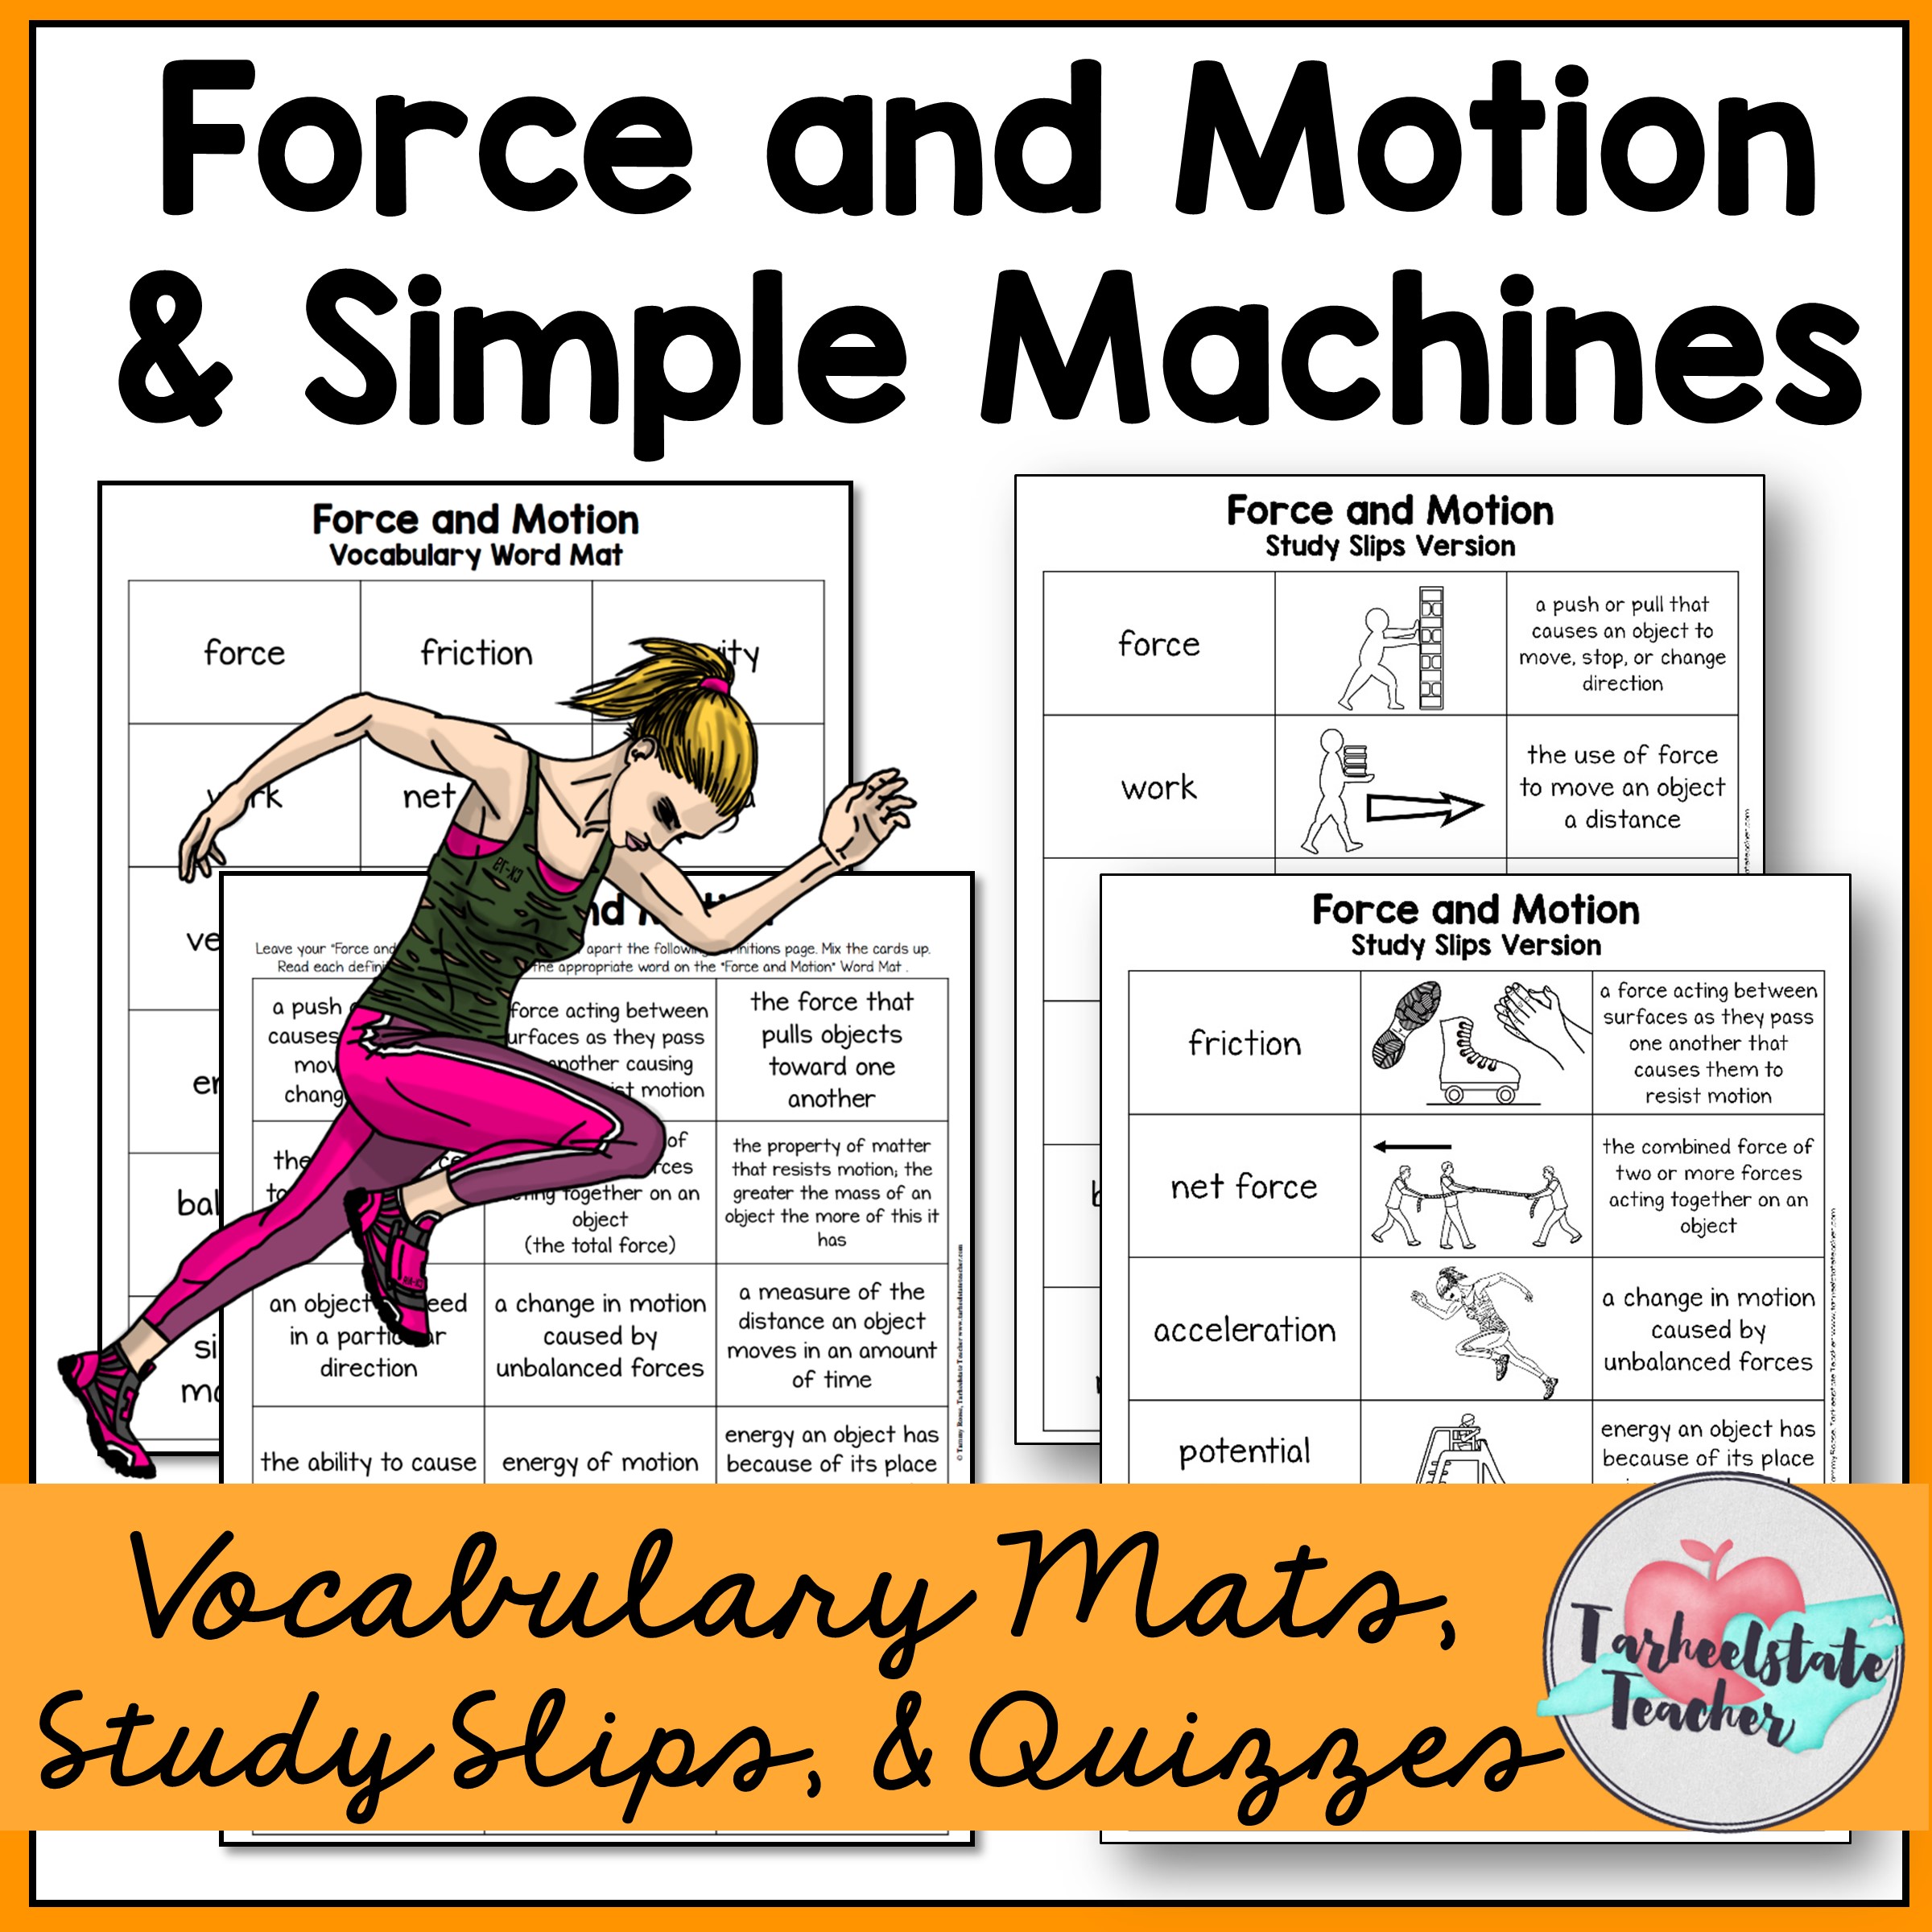 Force and Motion and Simple Machines Vocabulary Mats.JPG